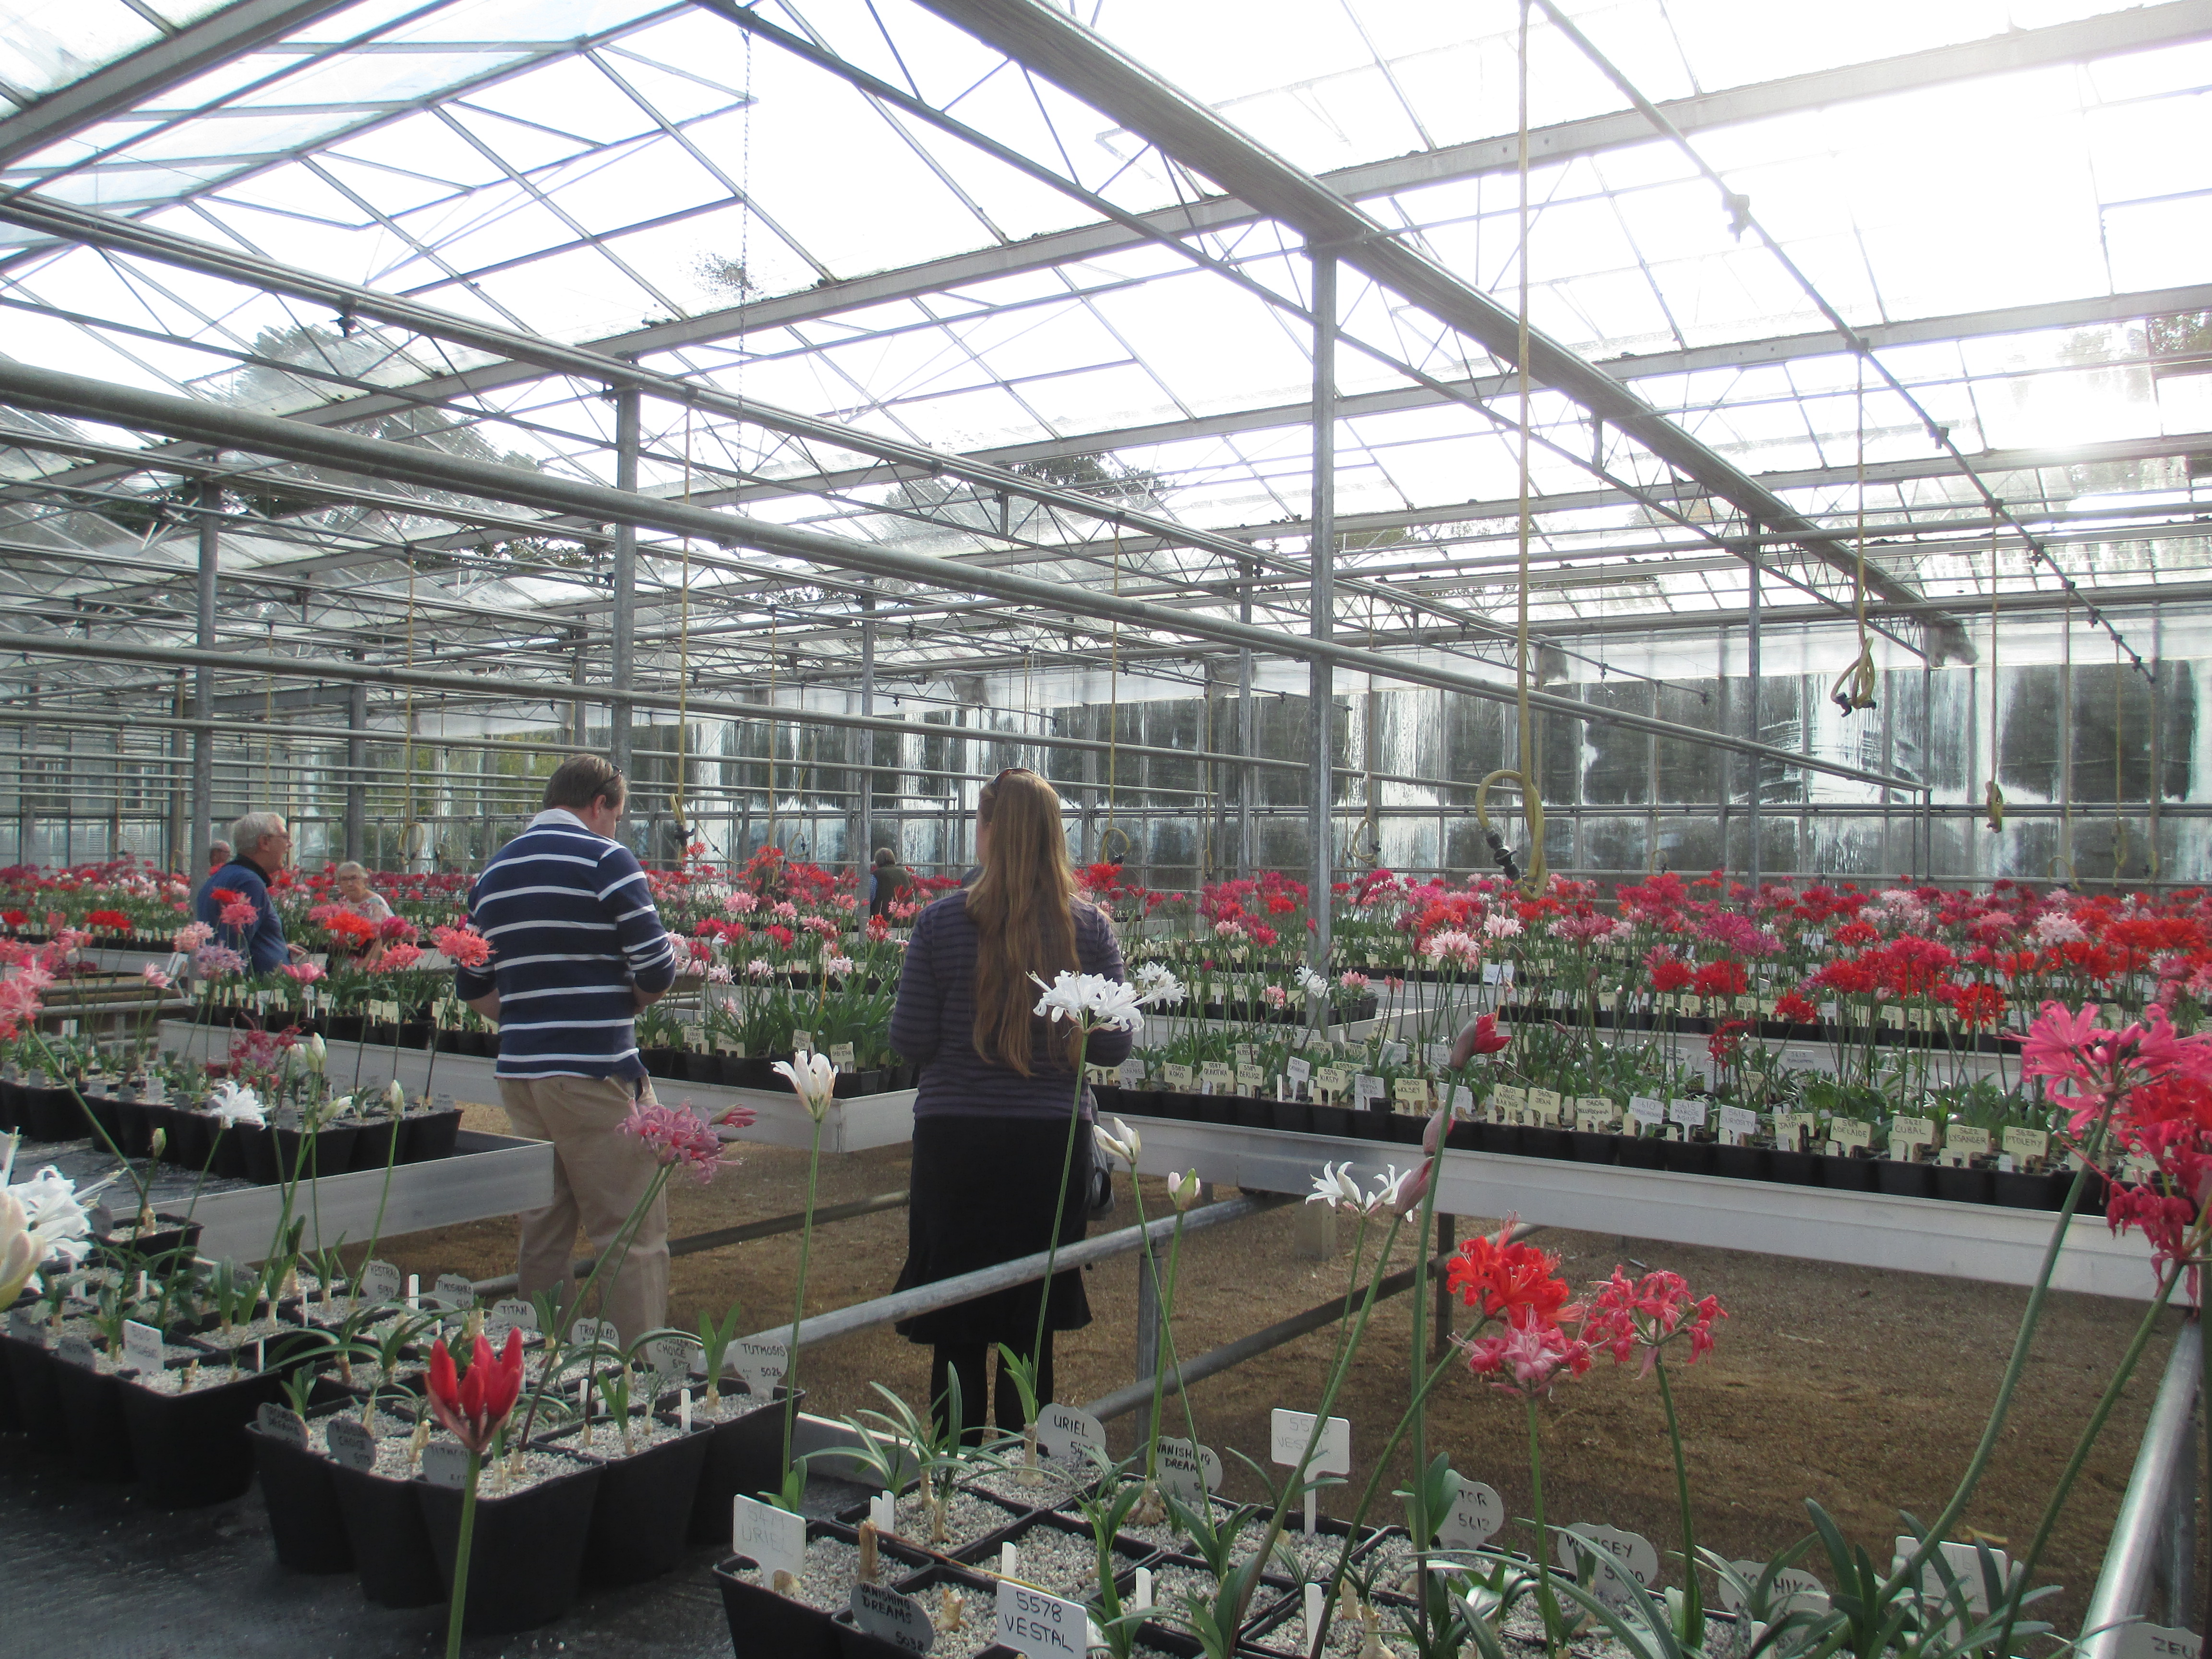 NAAS members also visit the huge glasshouse to view more Nerines.